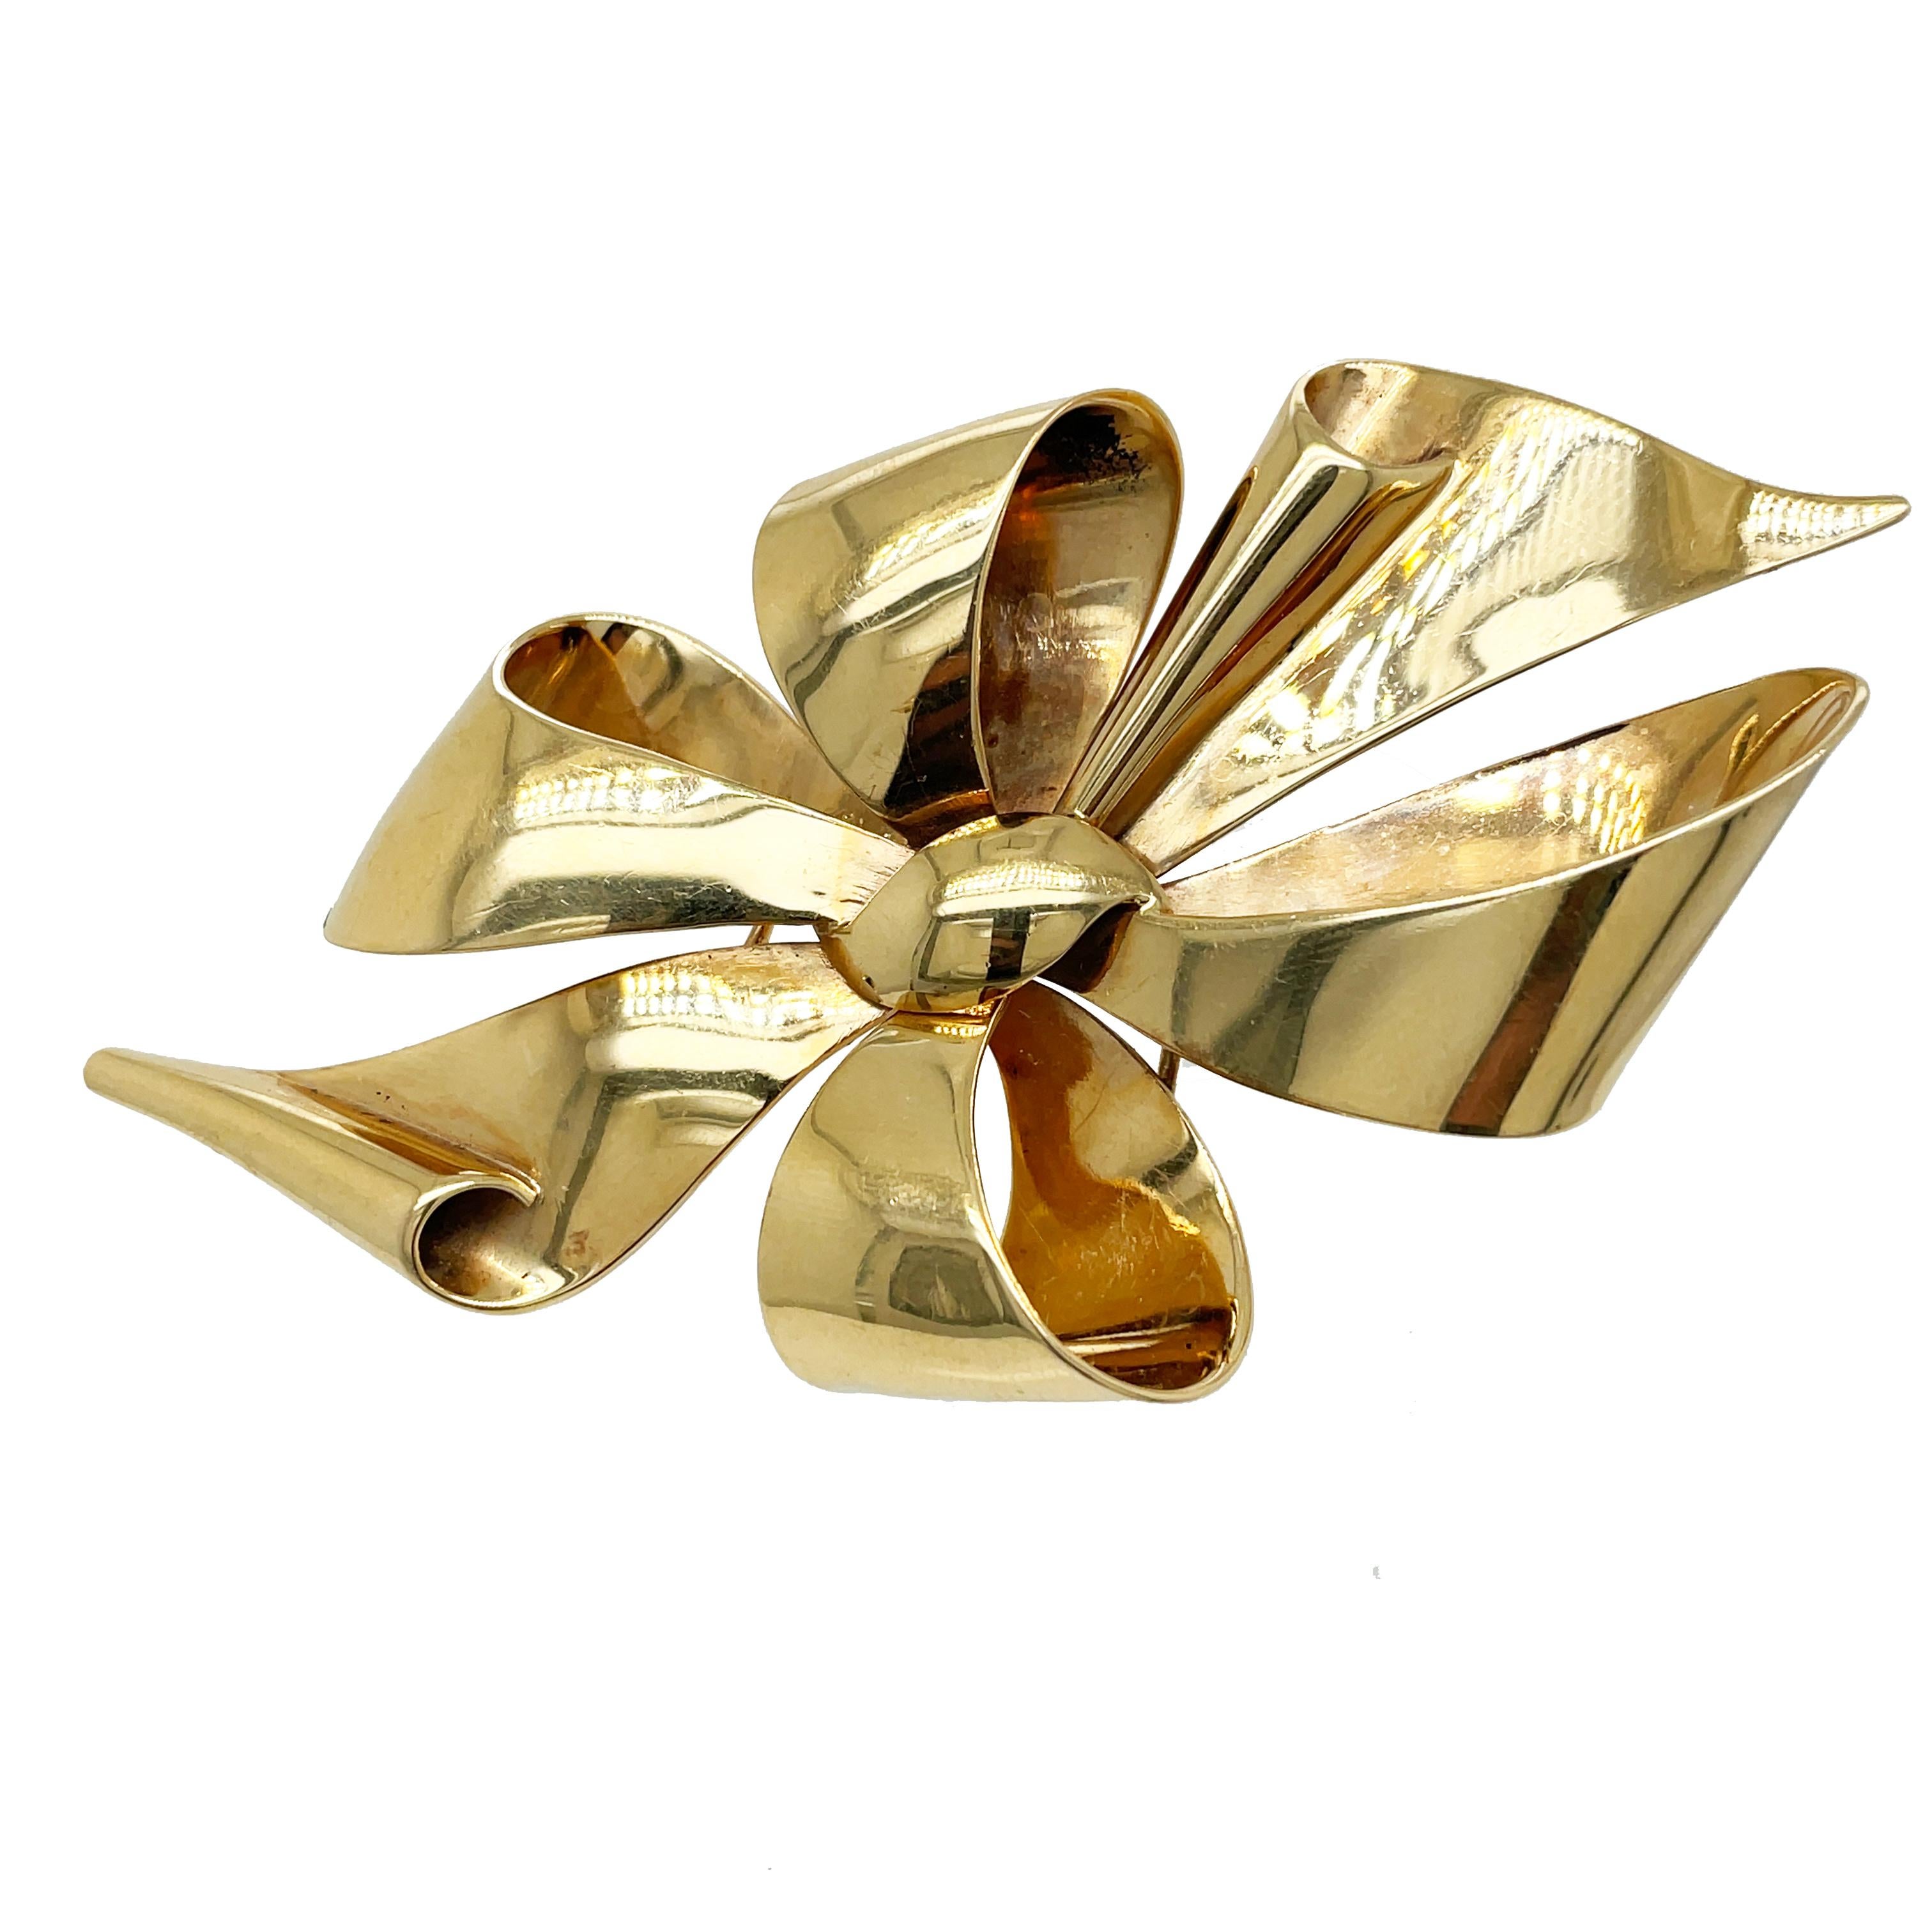 This is an absolutely stellar 14K yellow gold retro bow pin signed by Larter measuring 3.14in x 1.57 in. The craftsmanship and design are gorgeous in this pin and is sure to spark a conversation. This would make an excellent addition to your jewelry